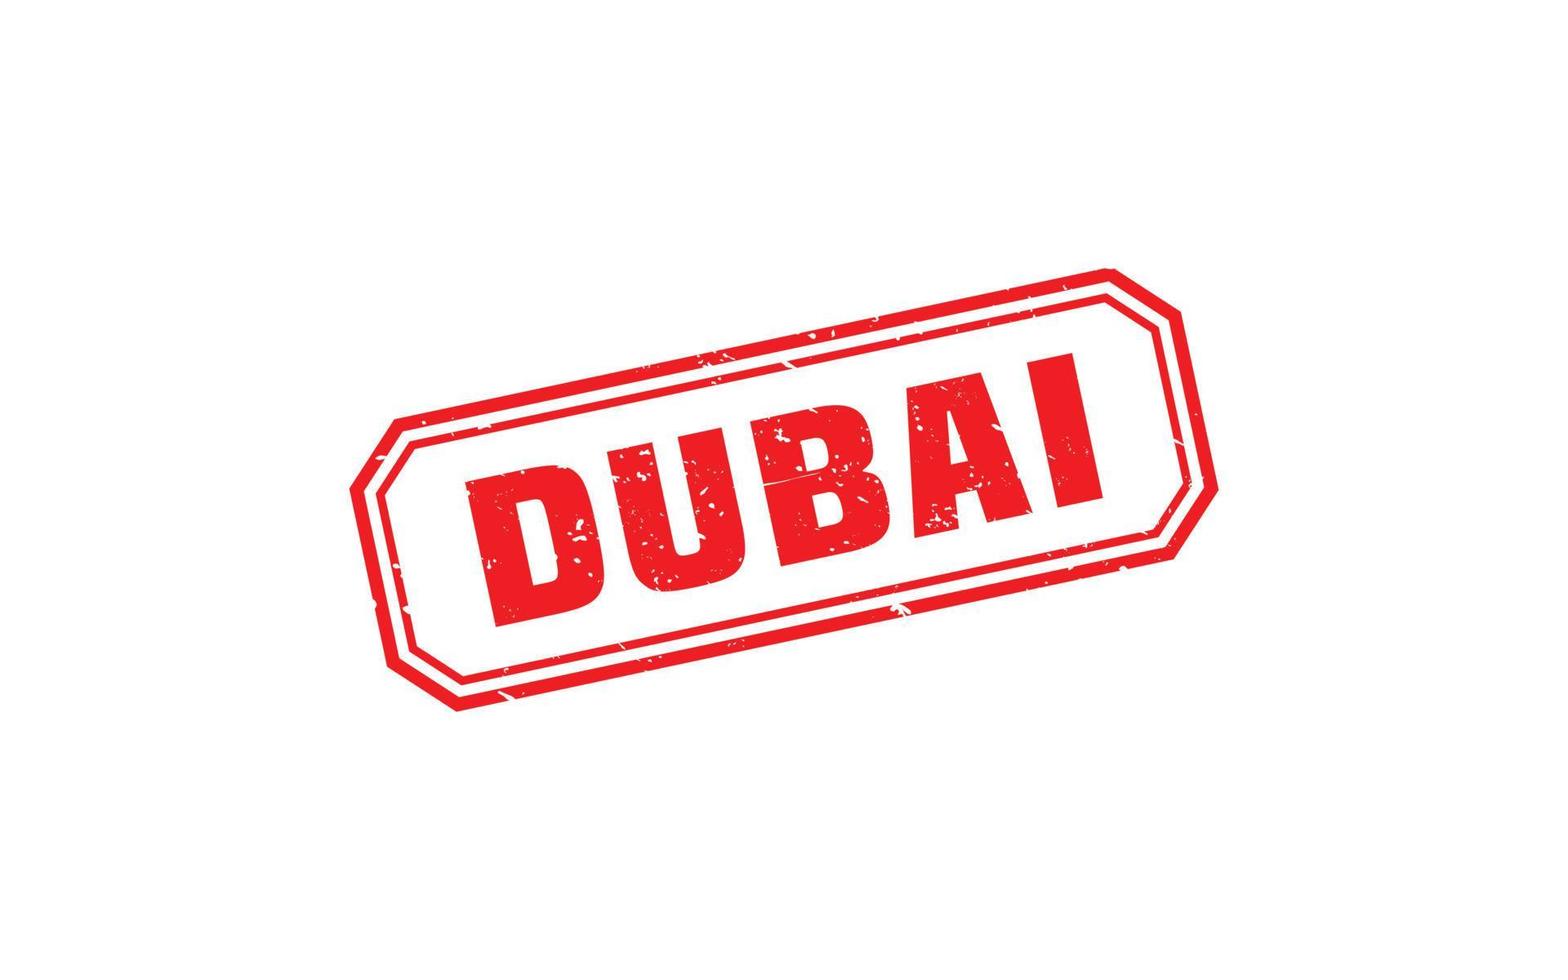 DUBAI stamp rubber with grunge style on white background vector